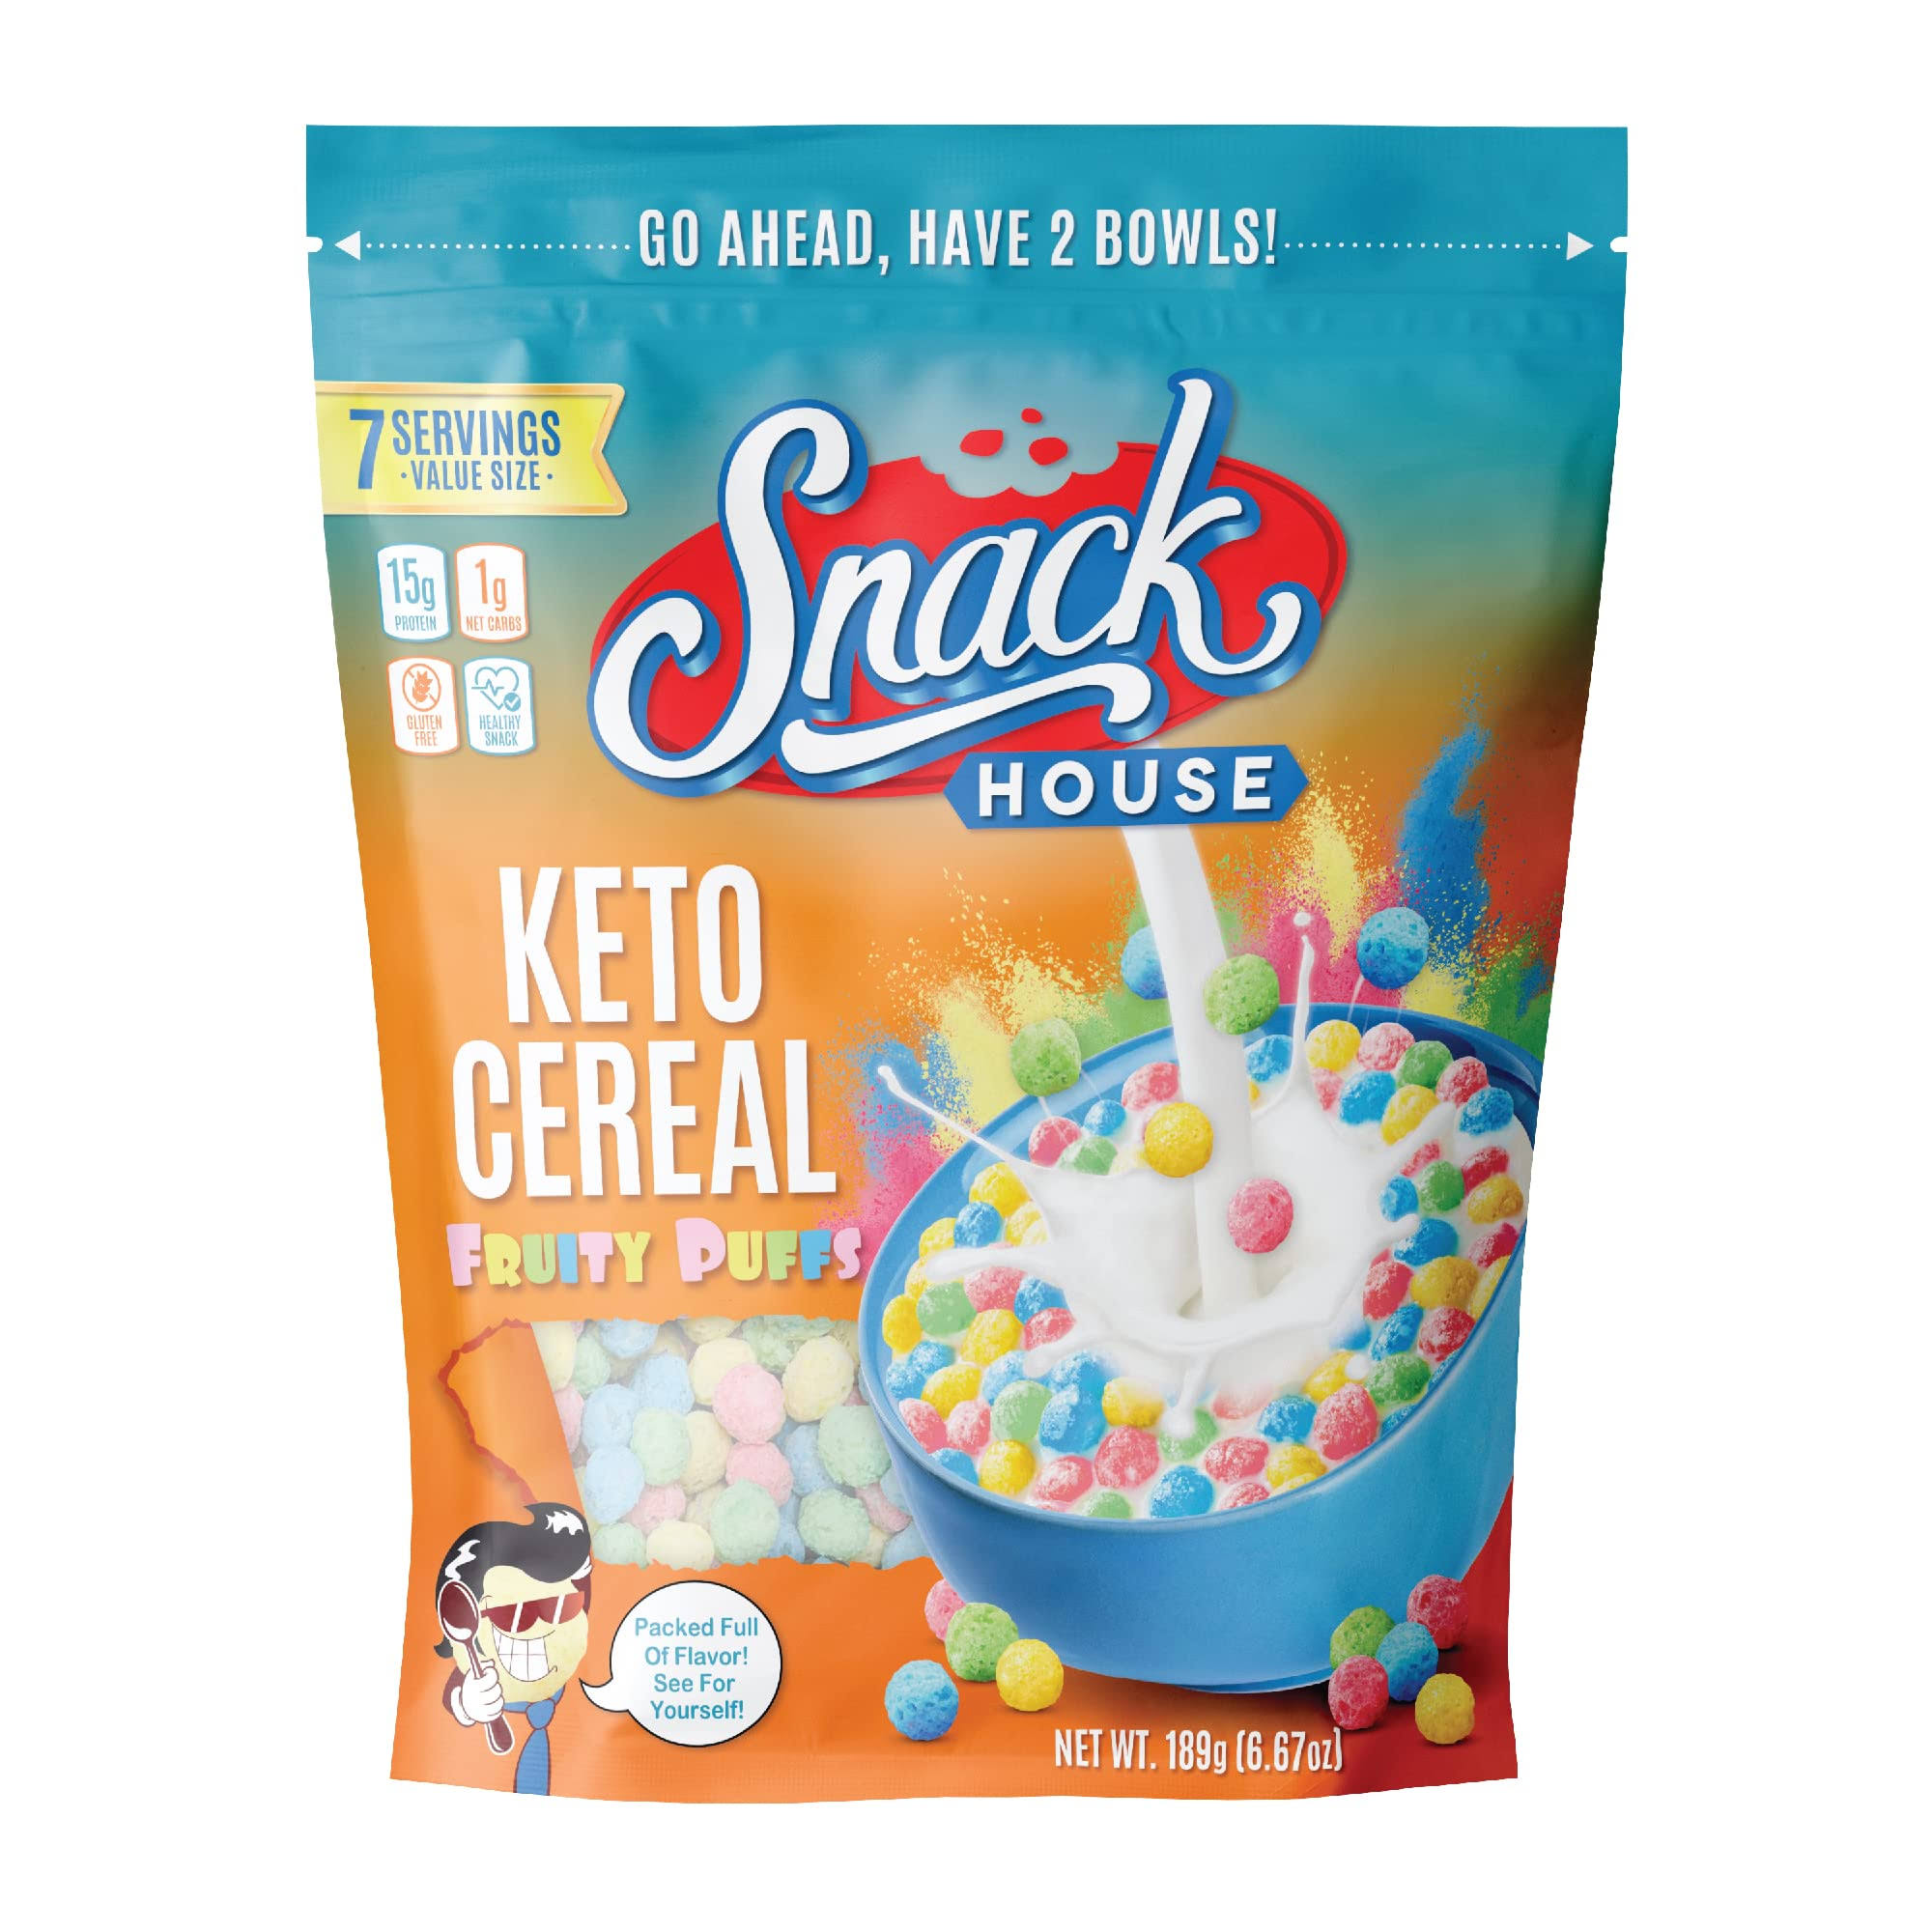 Snack House Keto Cereal Fruity Rubbles